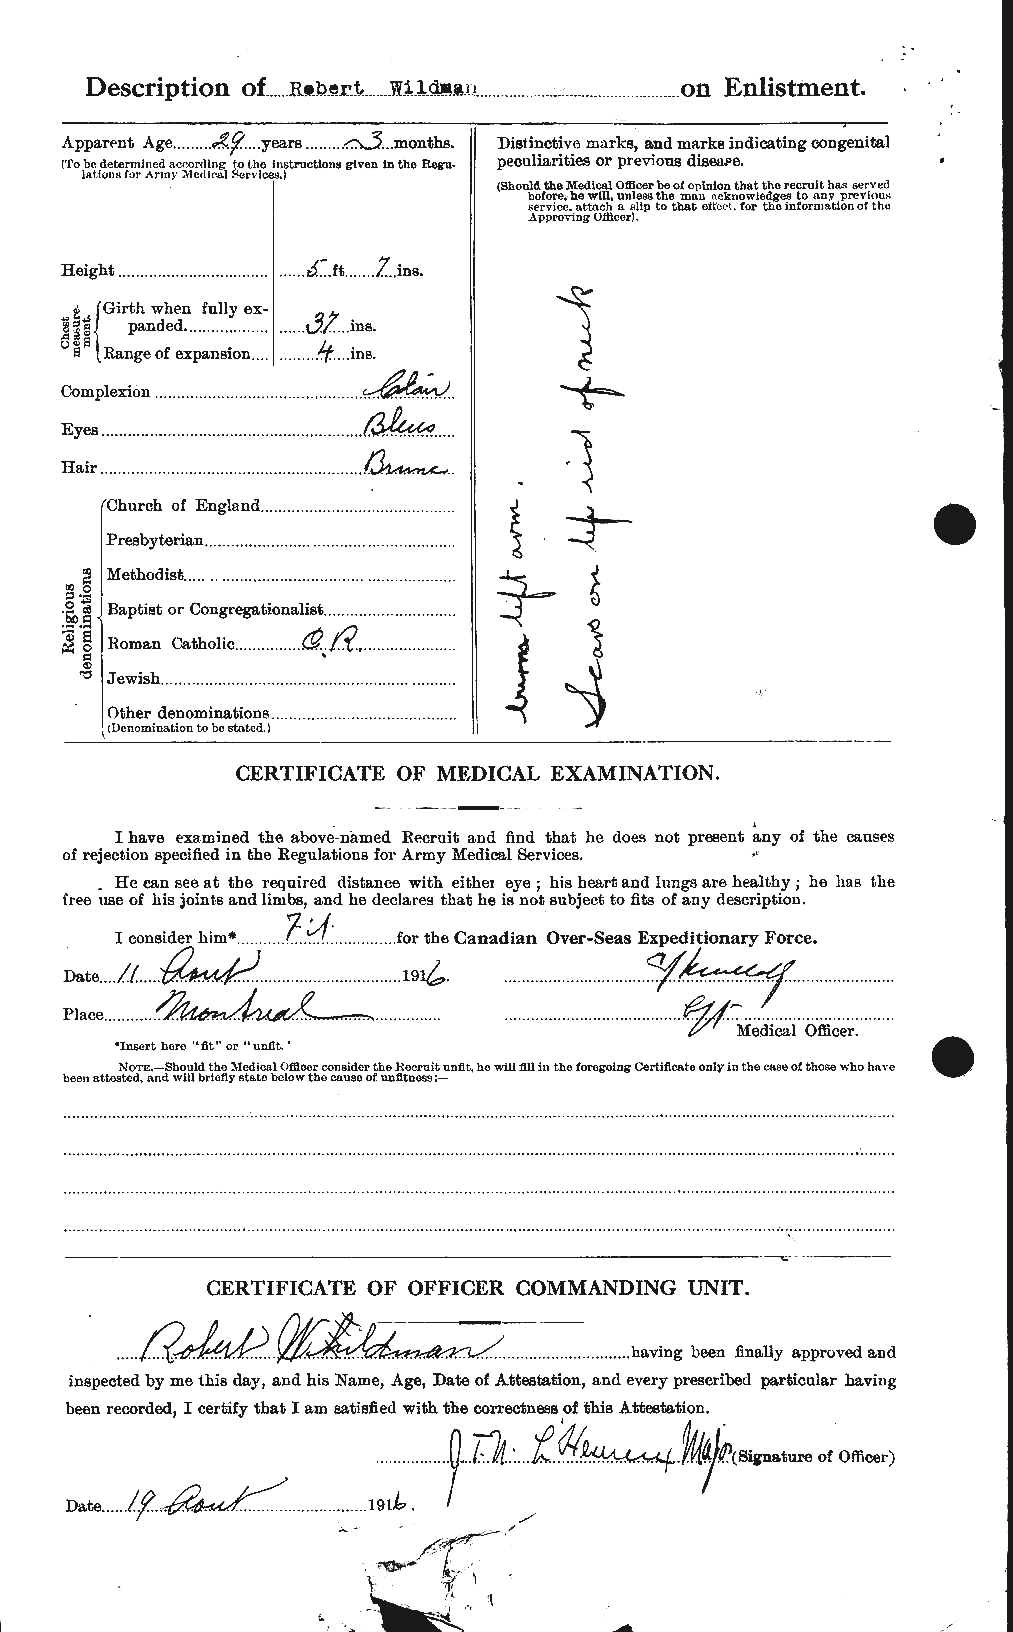 Personnel Records of the First World War - CEF 680136b